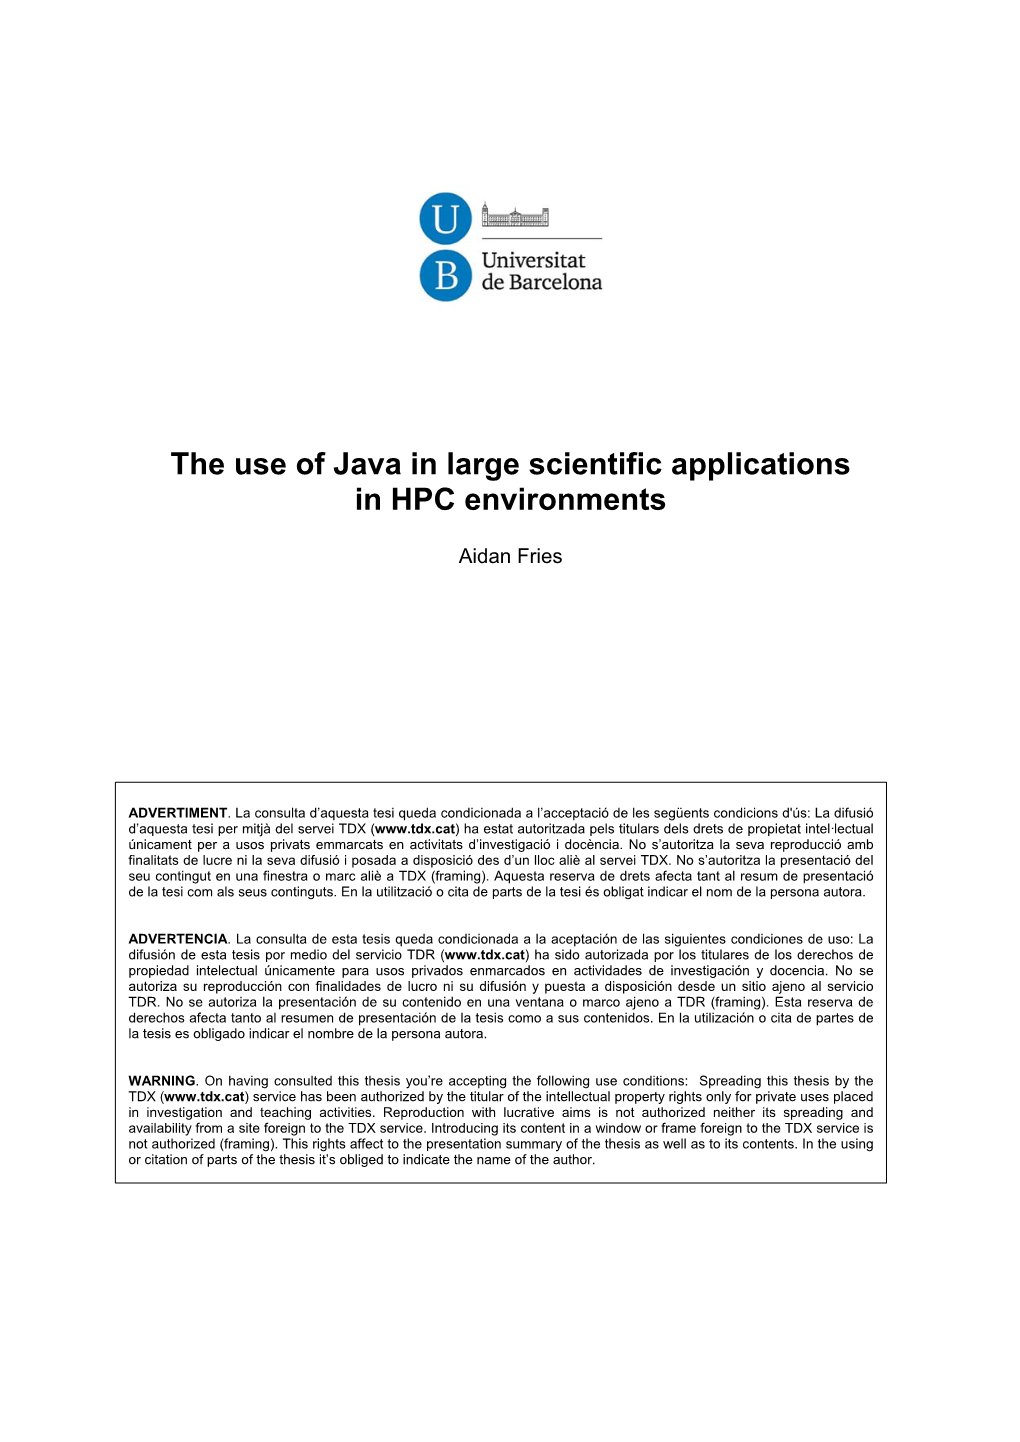 The Use of Java in Large Scientific Applications in HPC Environments